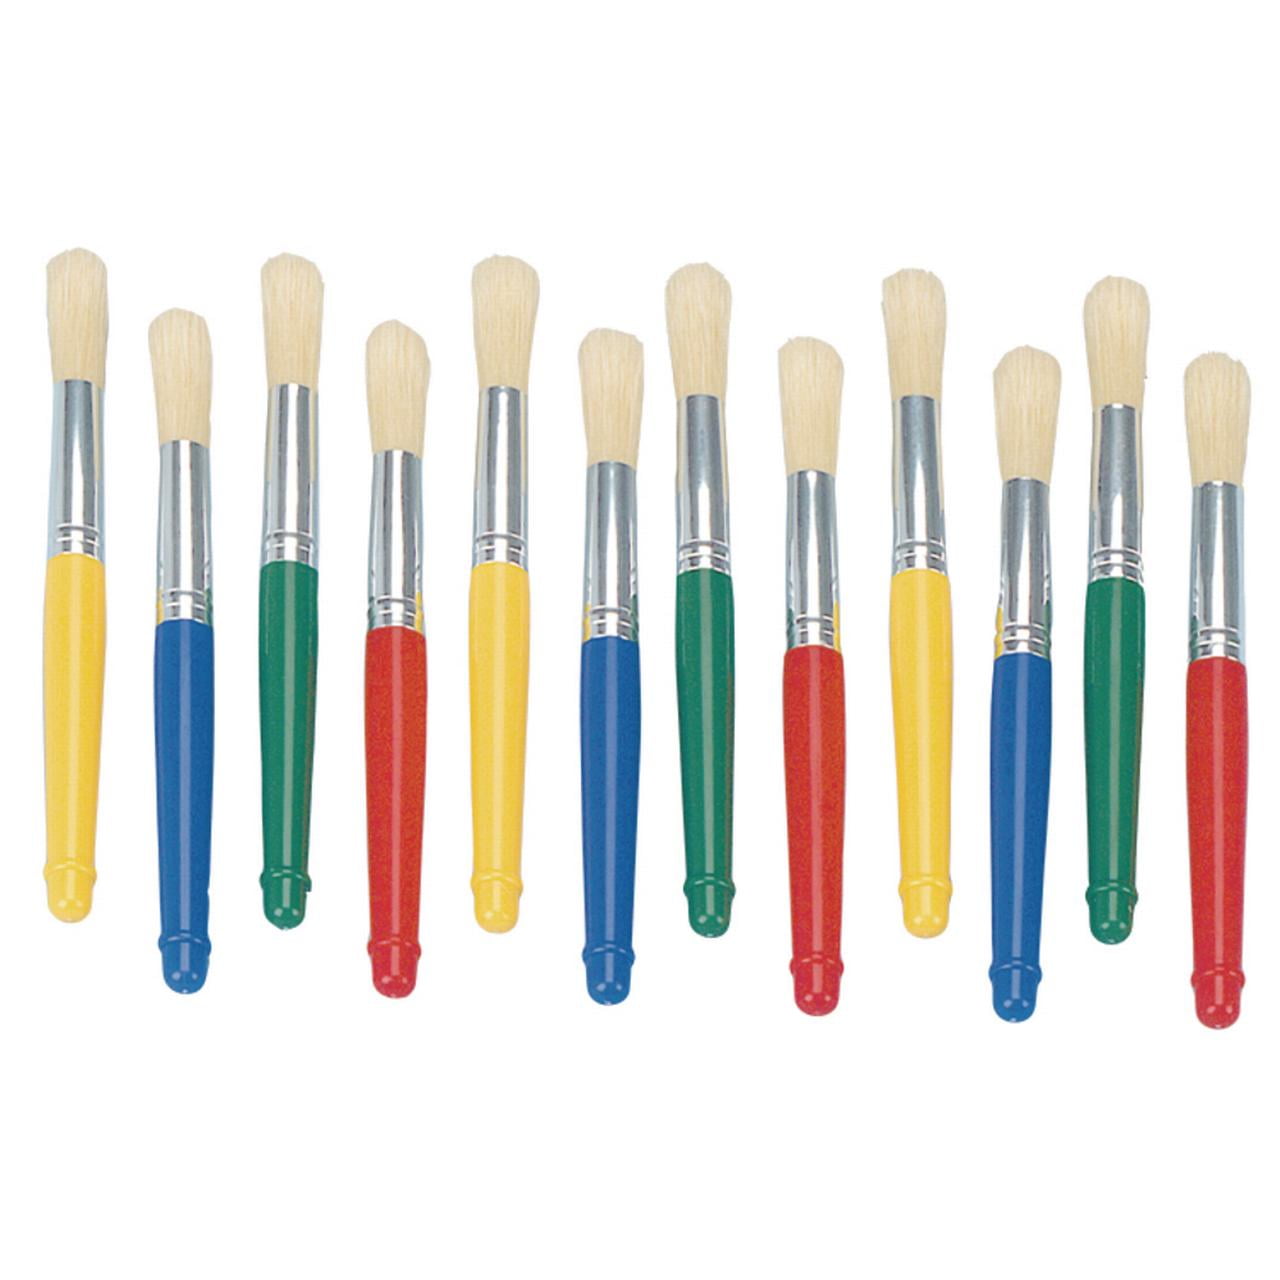 Colorations Plastic Jumbo Chubby Paint Brushes, Set of 12